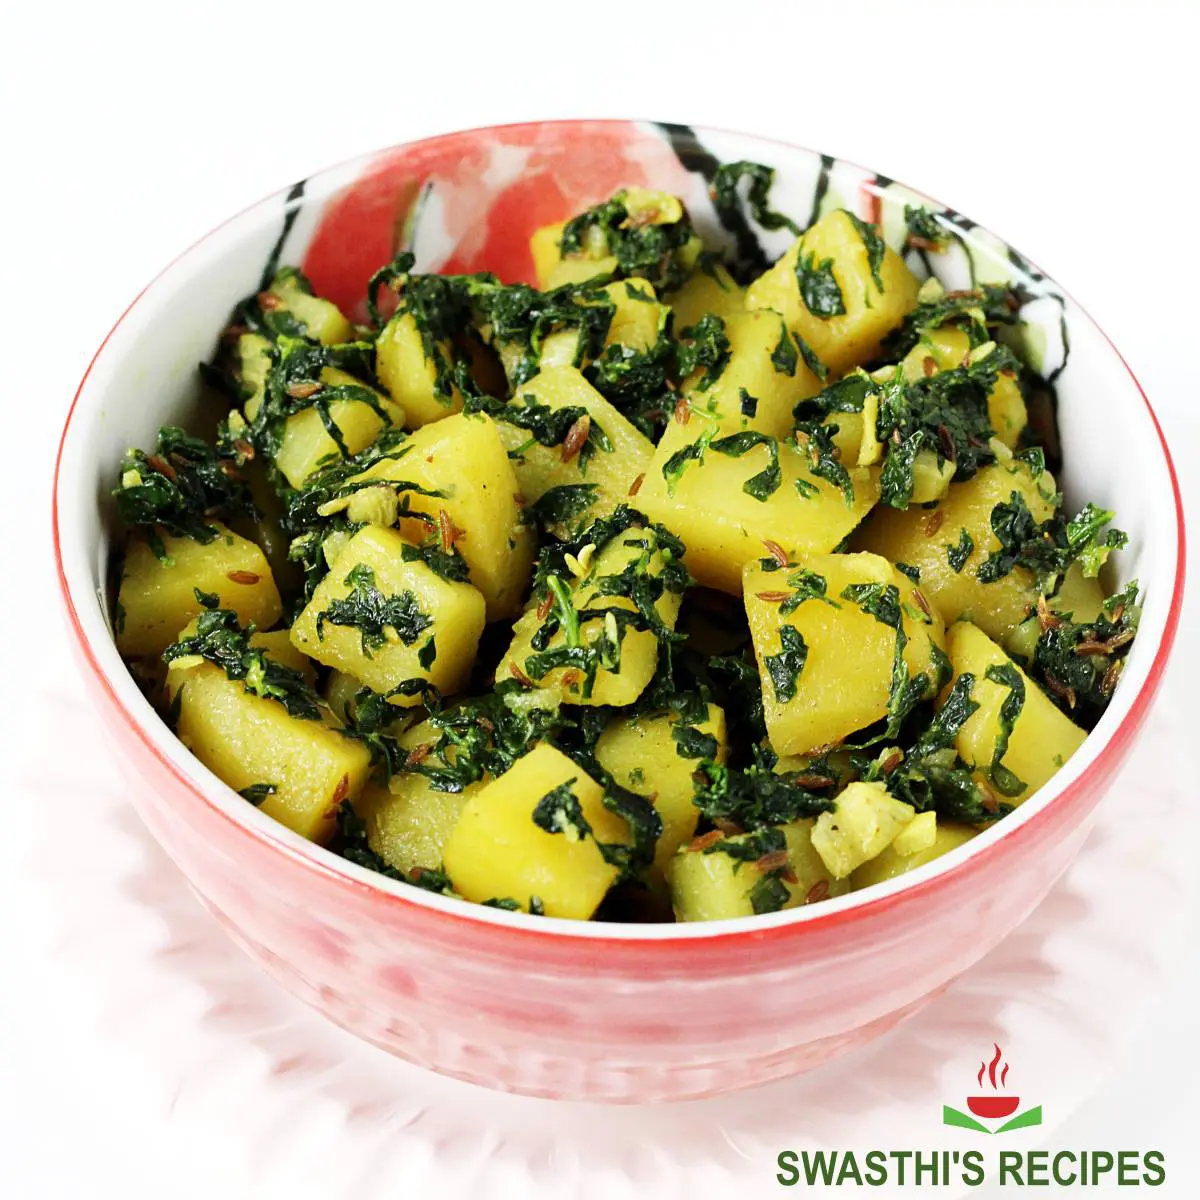 aloo methi recipe made with potatoes and fenugreek leaves